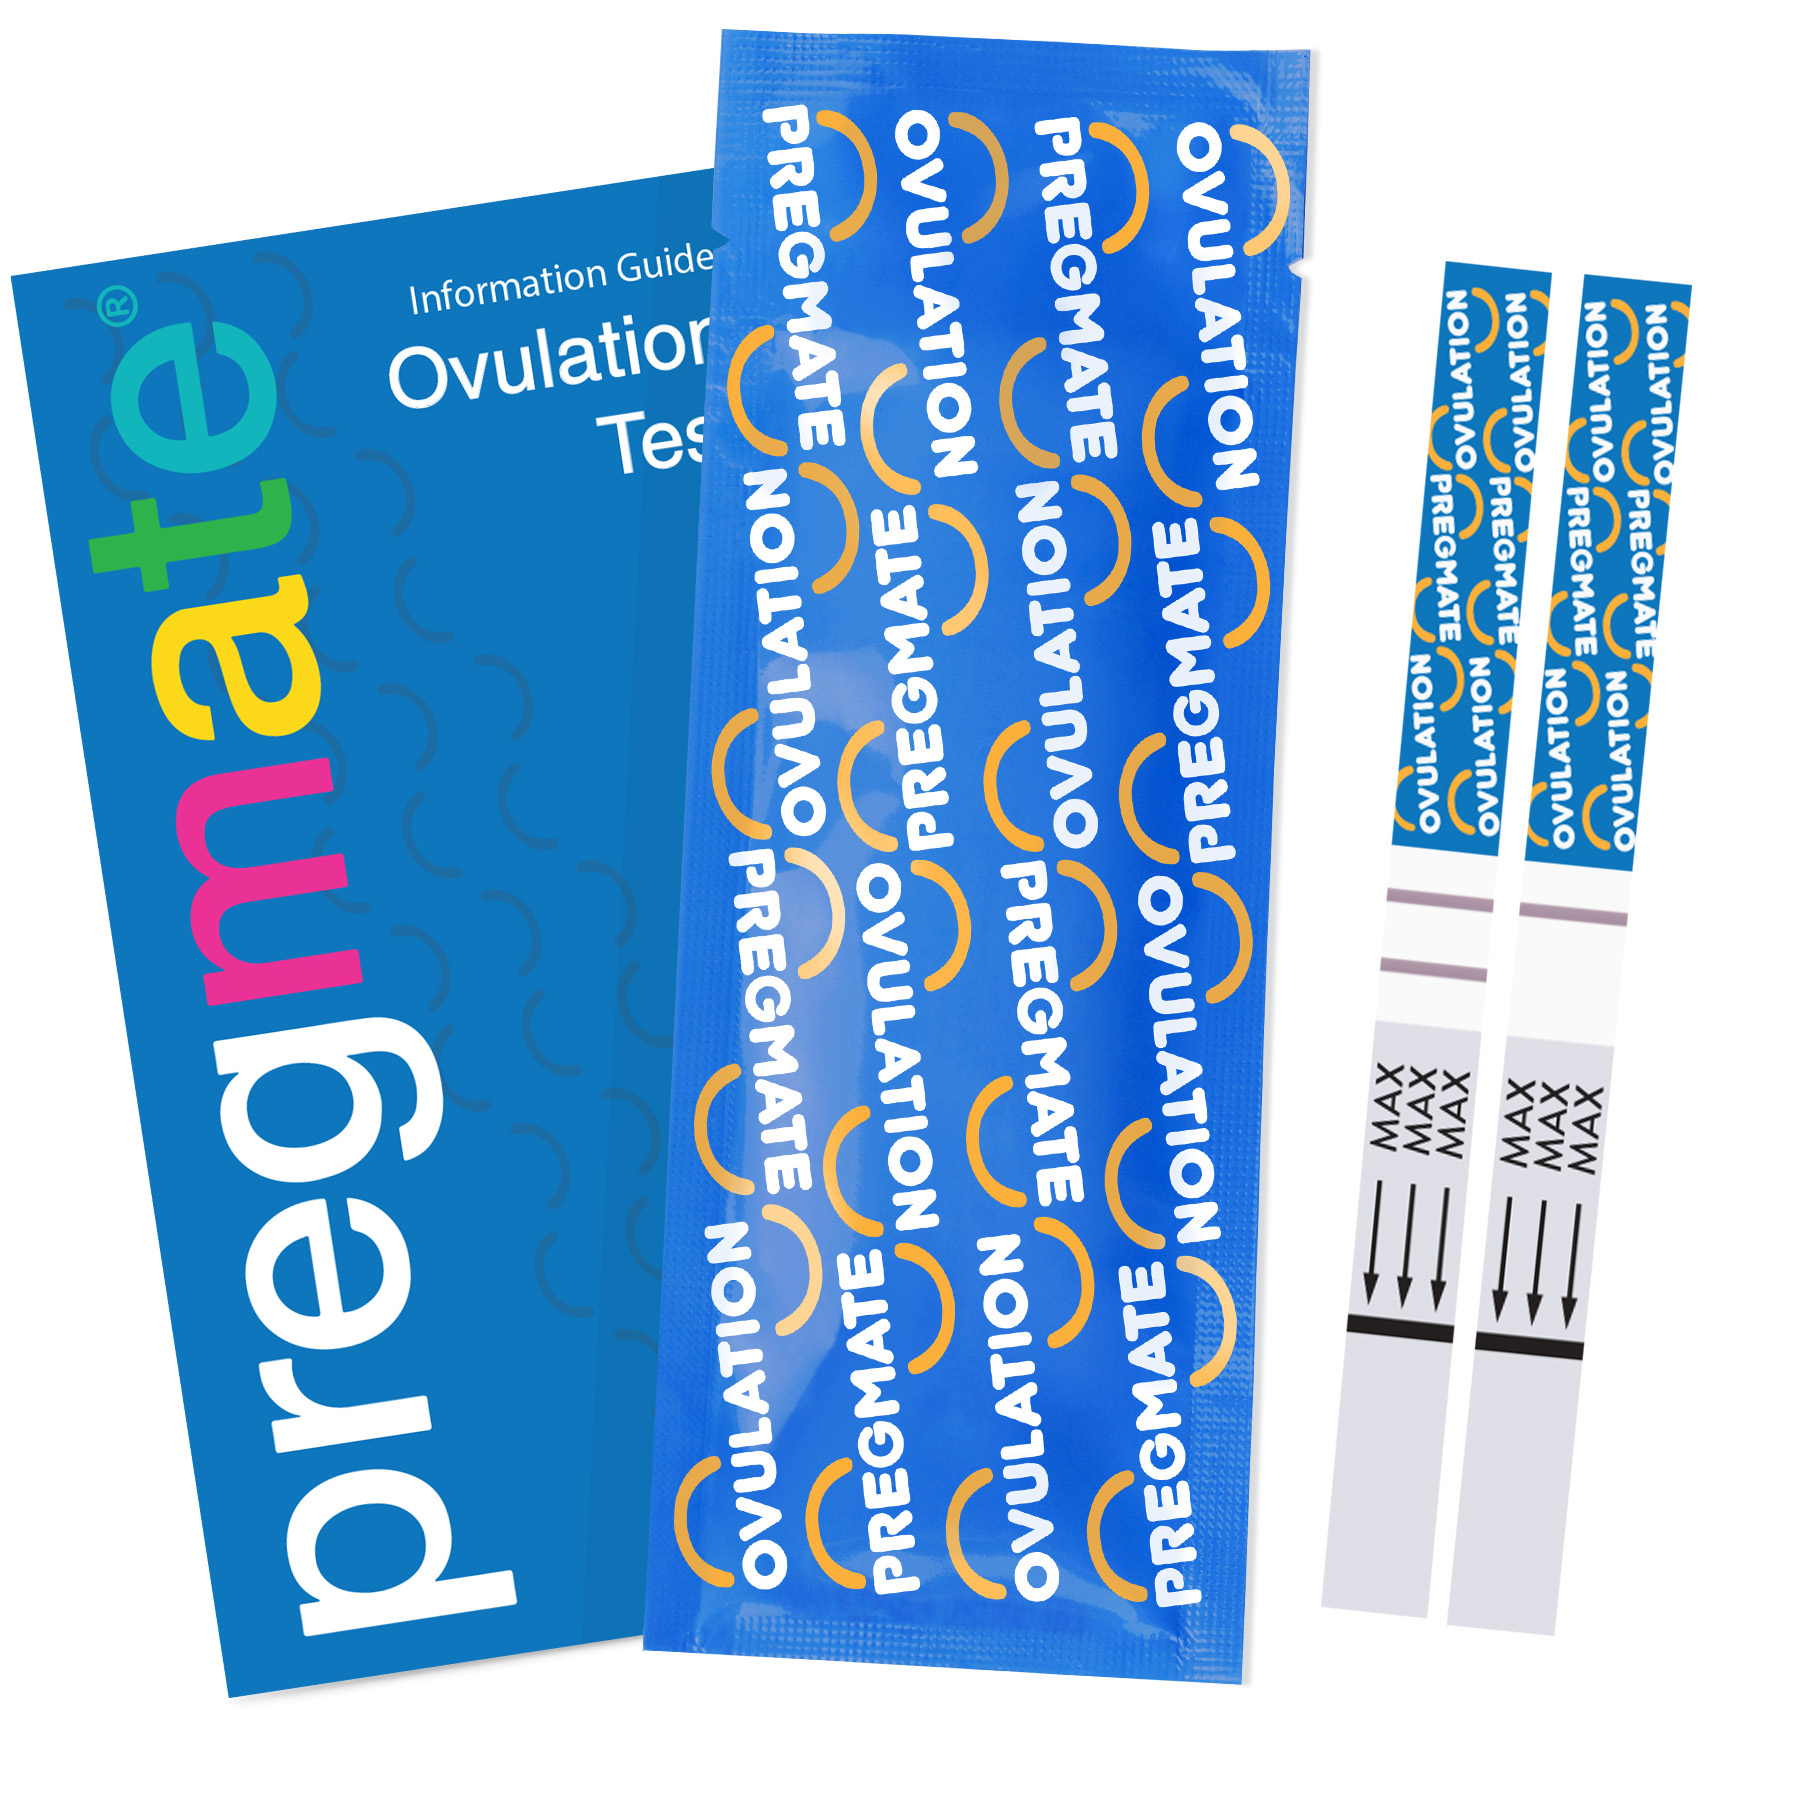 Pregmate 50 Ovulation Test Strips Predictor Kit (50 Count) - image 3 of 10